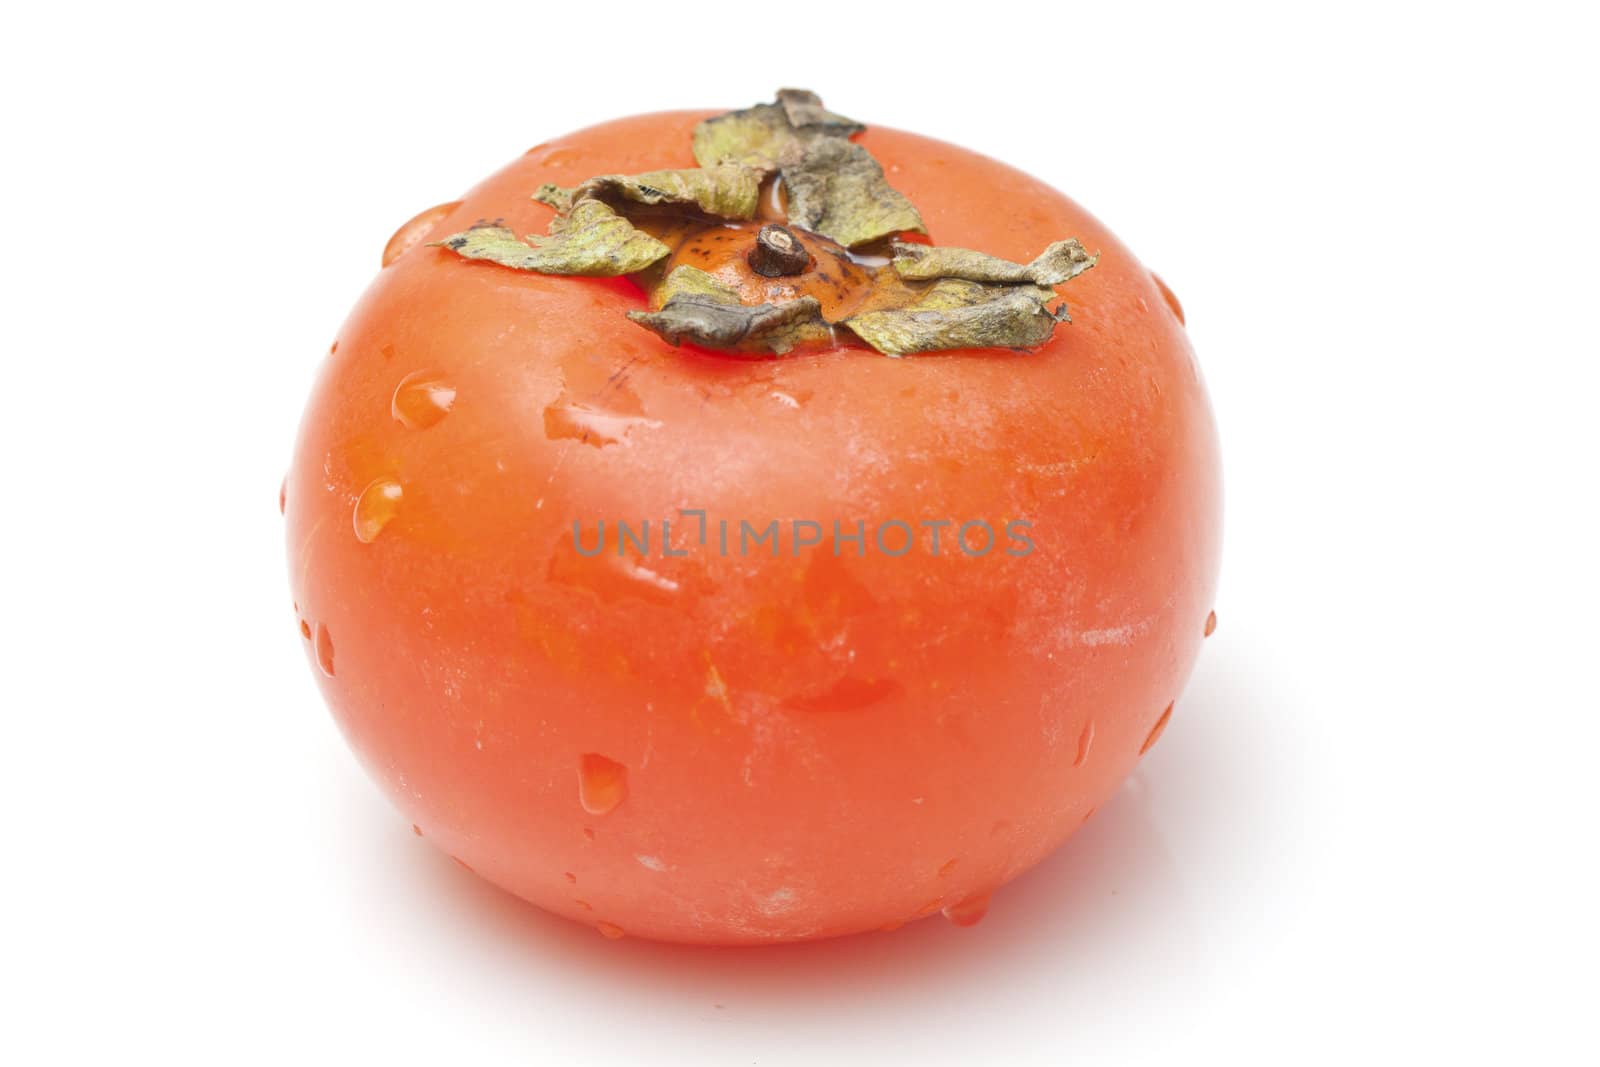 Orange persimmon isolated on white background by kawing921